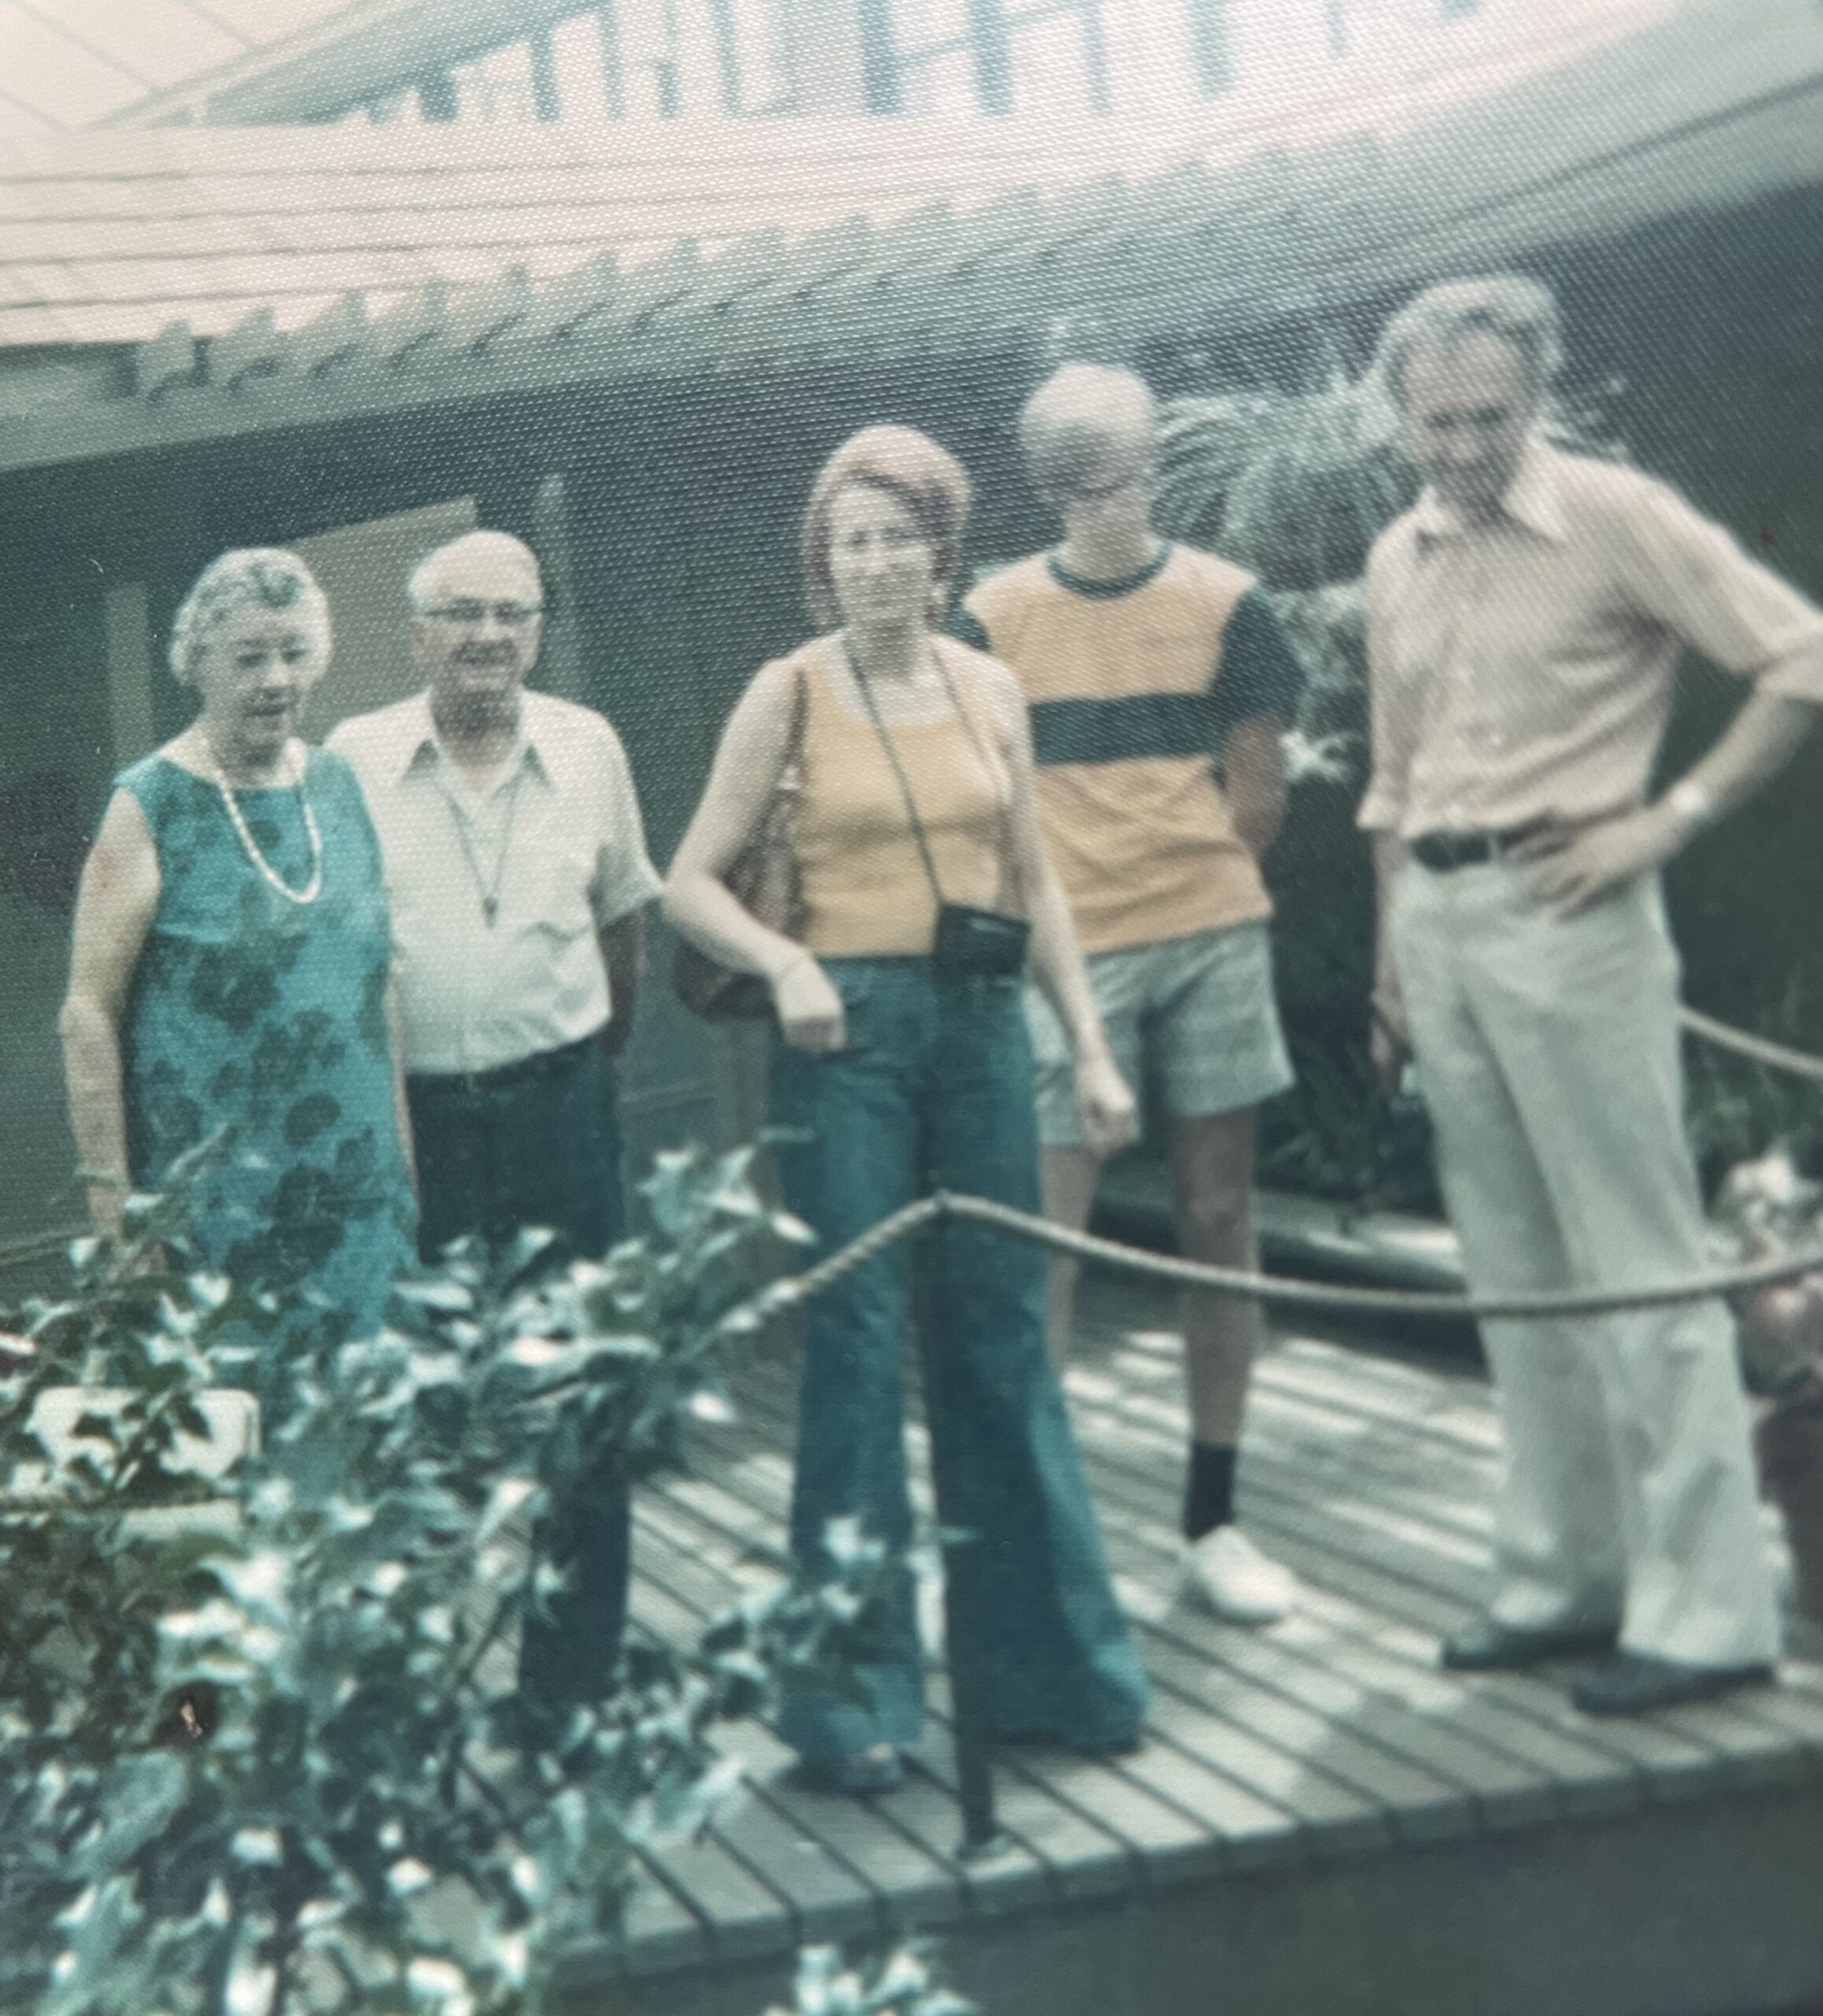 The first meeting between the two families, in the United States in 1975. Norman and his wife are on the left, and Pierre and Ginette Adeline (Ludovic's parents) are on the right with Donald's son Scott standing between them. Photo enhanced and colors restored by MyHeritage